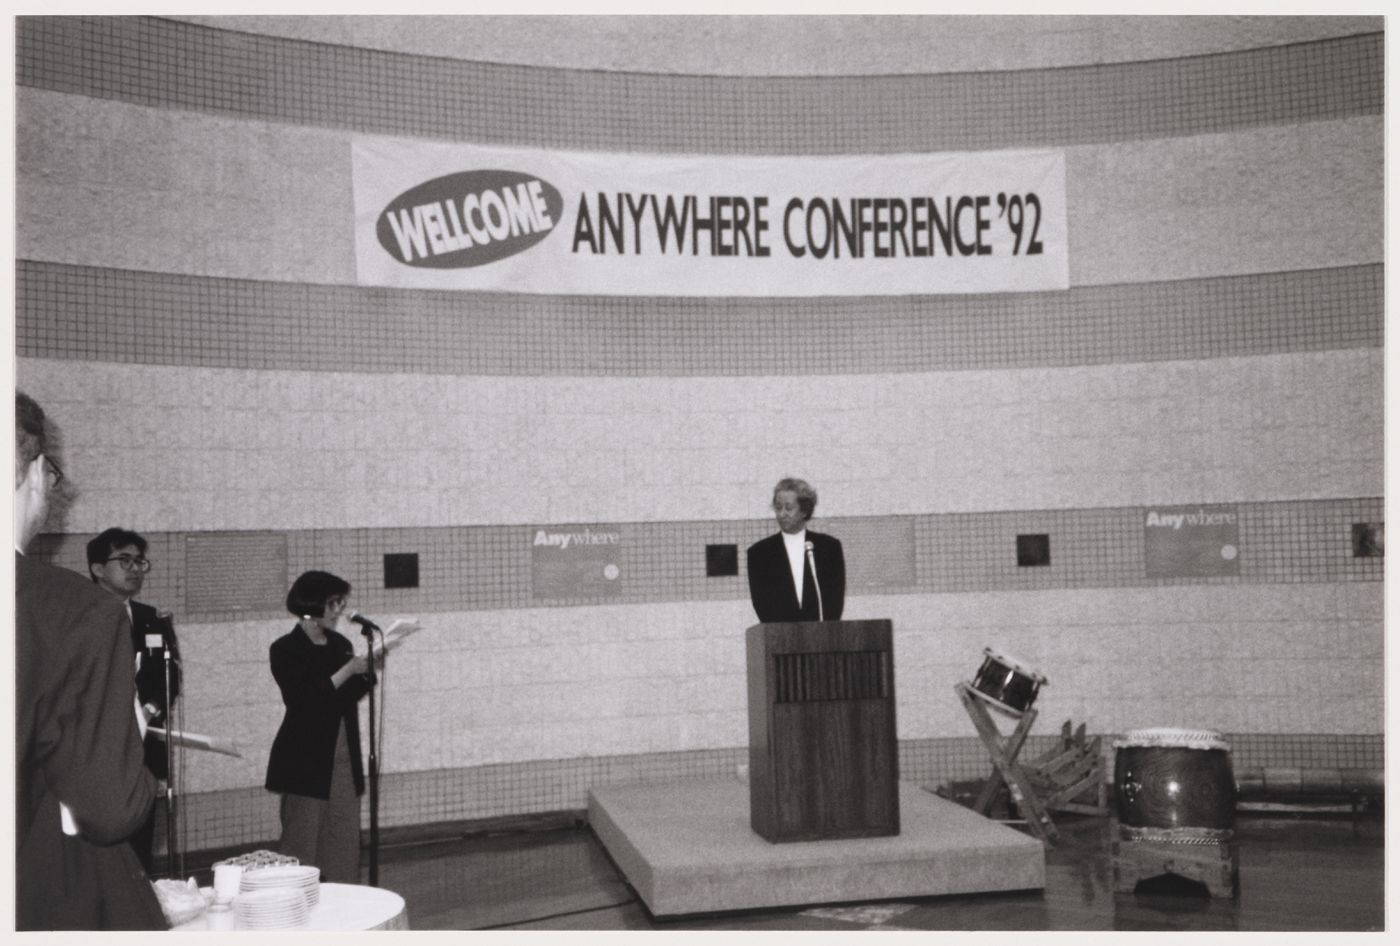 Photograph of the Anywhere conference